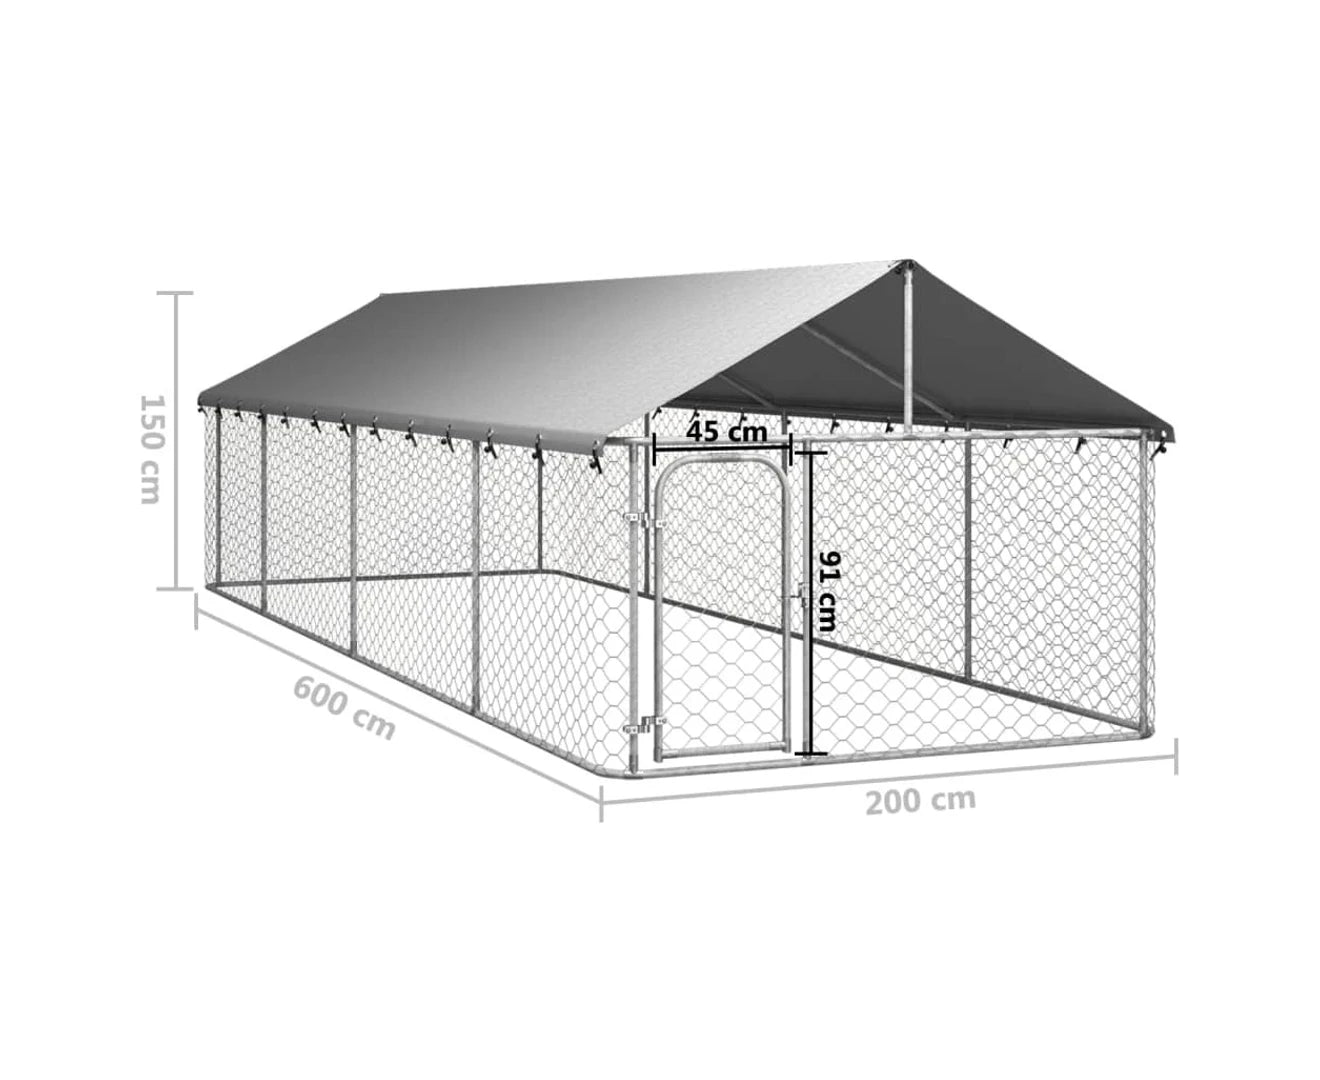 6x2m Steel Dog Enclosure with Roof